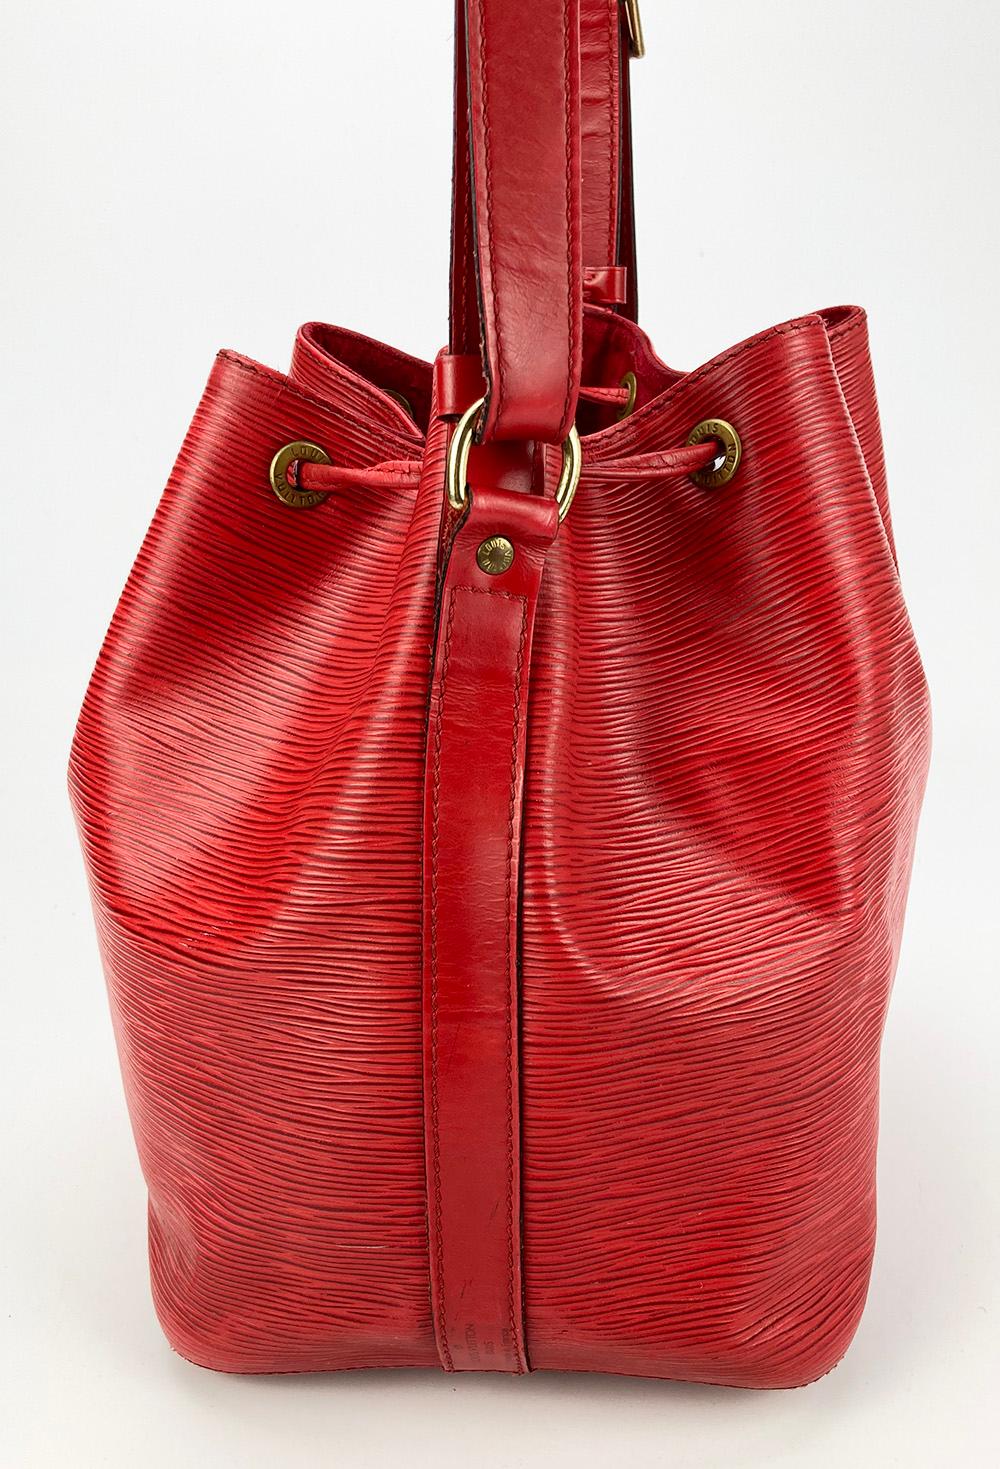 Louis Vuitton Castillian Red Epi Noe Drawstring Bucket Bag in good condition. red epi leather exterior trimmed with gold hardware and leather. top drawstring closure opens to a red suede lined interior. overall good condition. scuffs and scratches